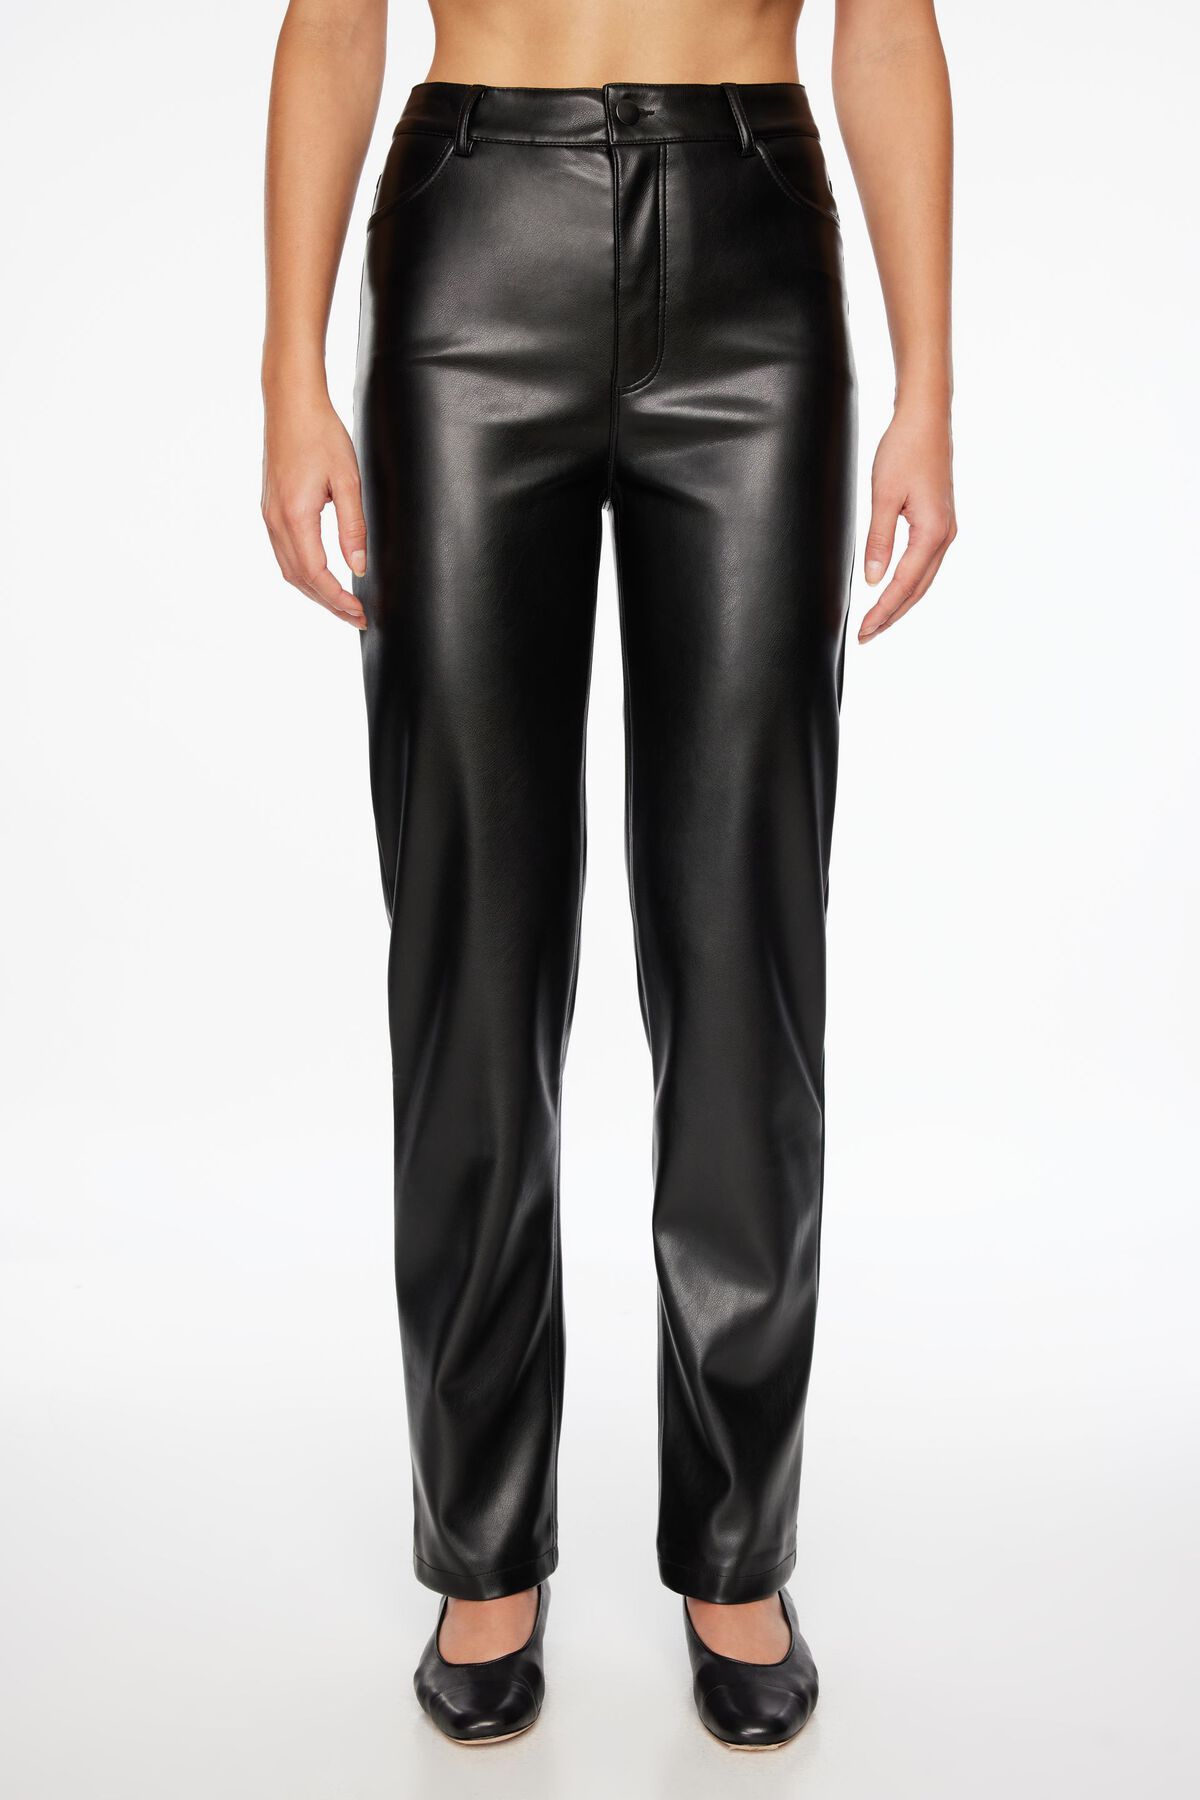 ♧ Ariel in the 80's Faux Leather Pants - BLACKFISH Brand New